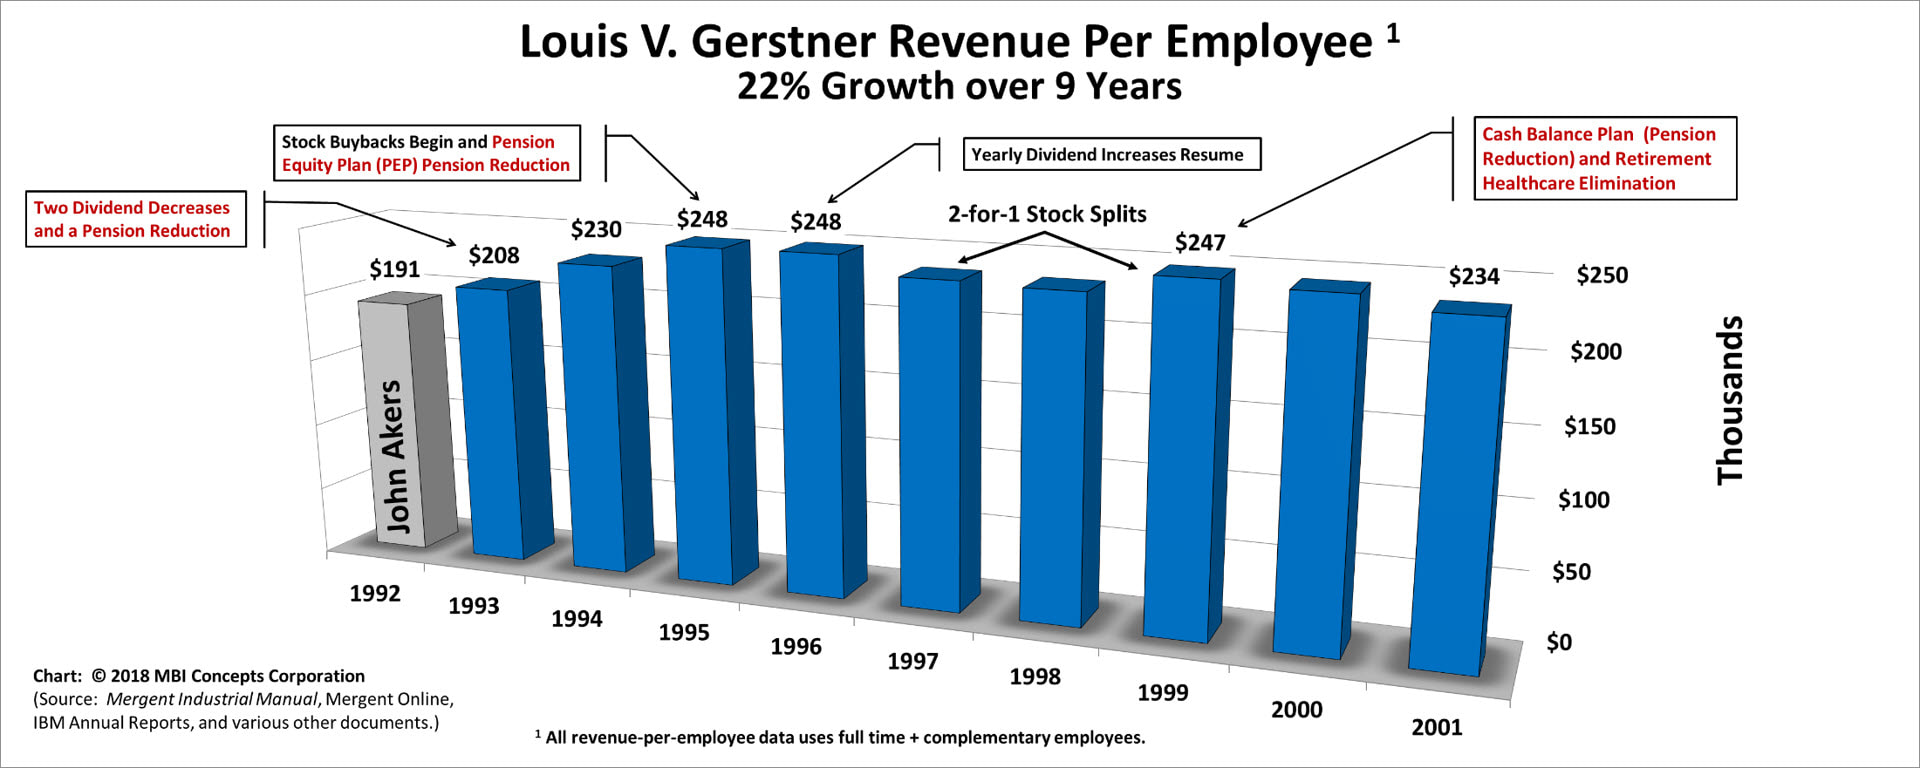 A color bar chart showing IBM's yearly revenue revenue per employee (sales productivity) from 1992 through 2001 for Louis V. (Lou) Gerstner.